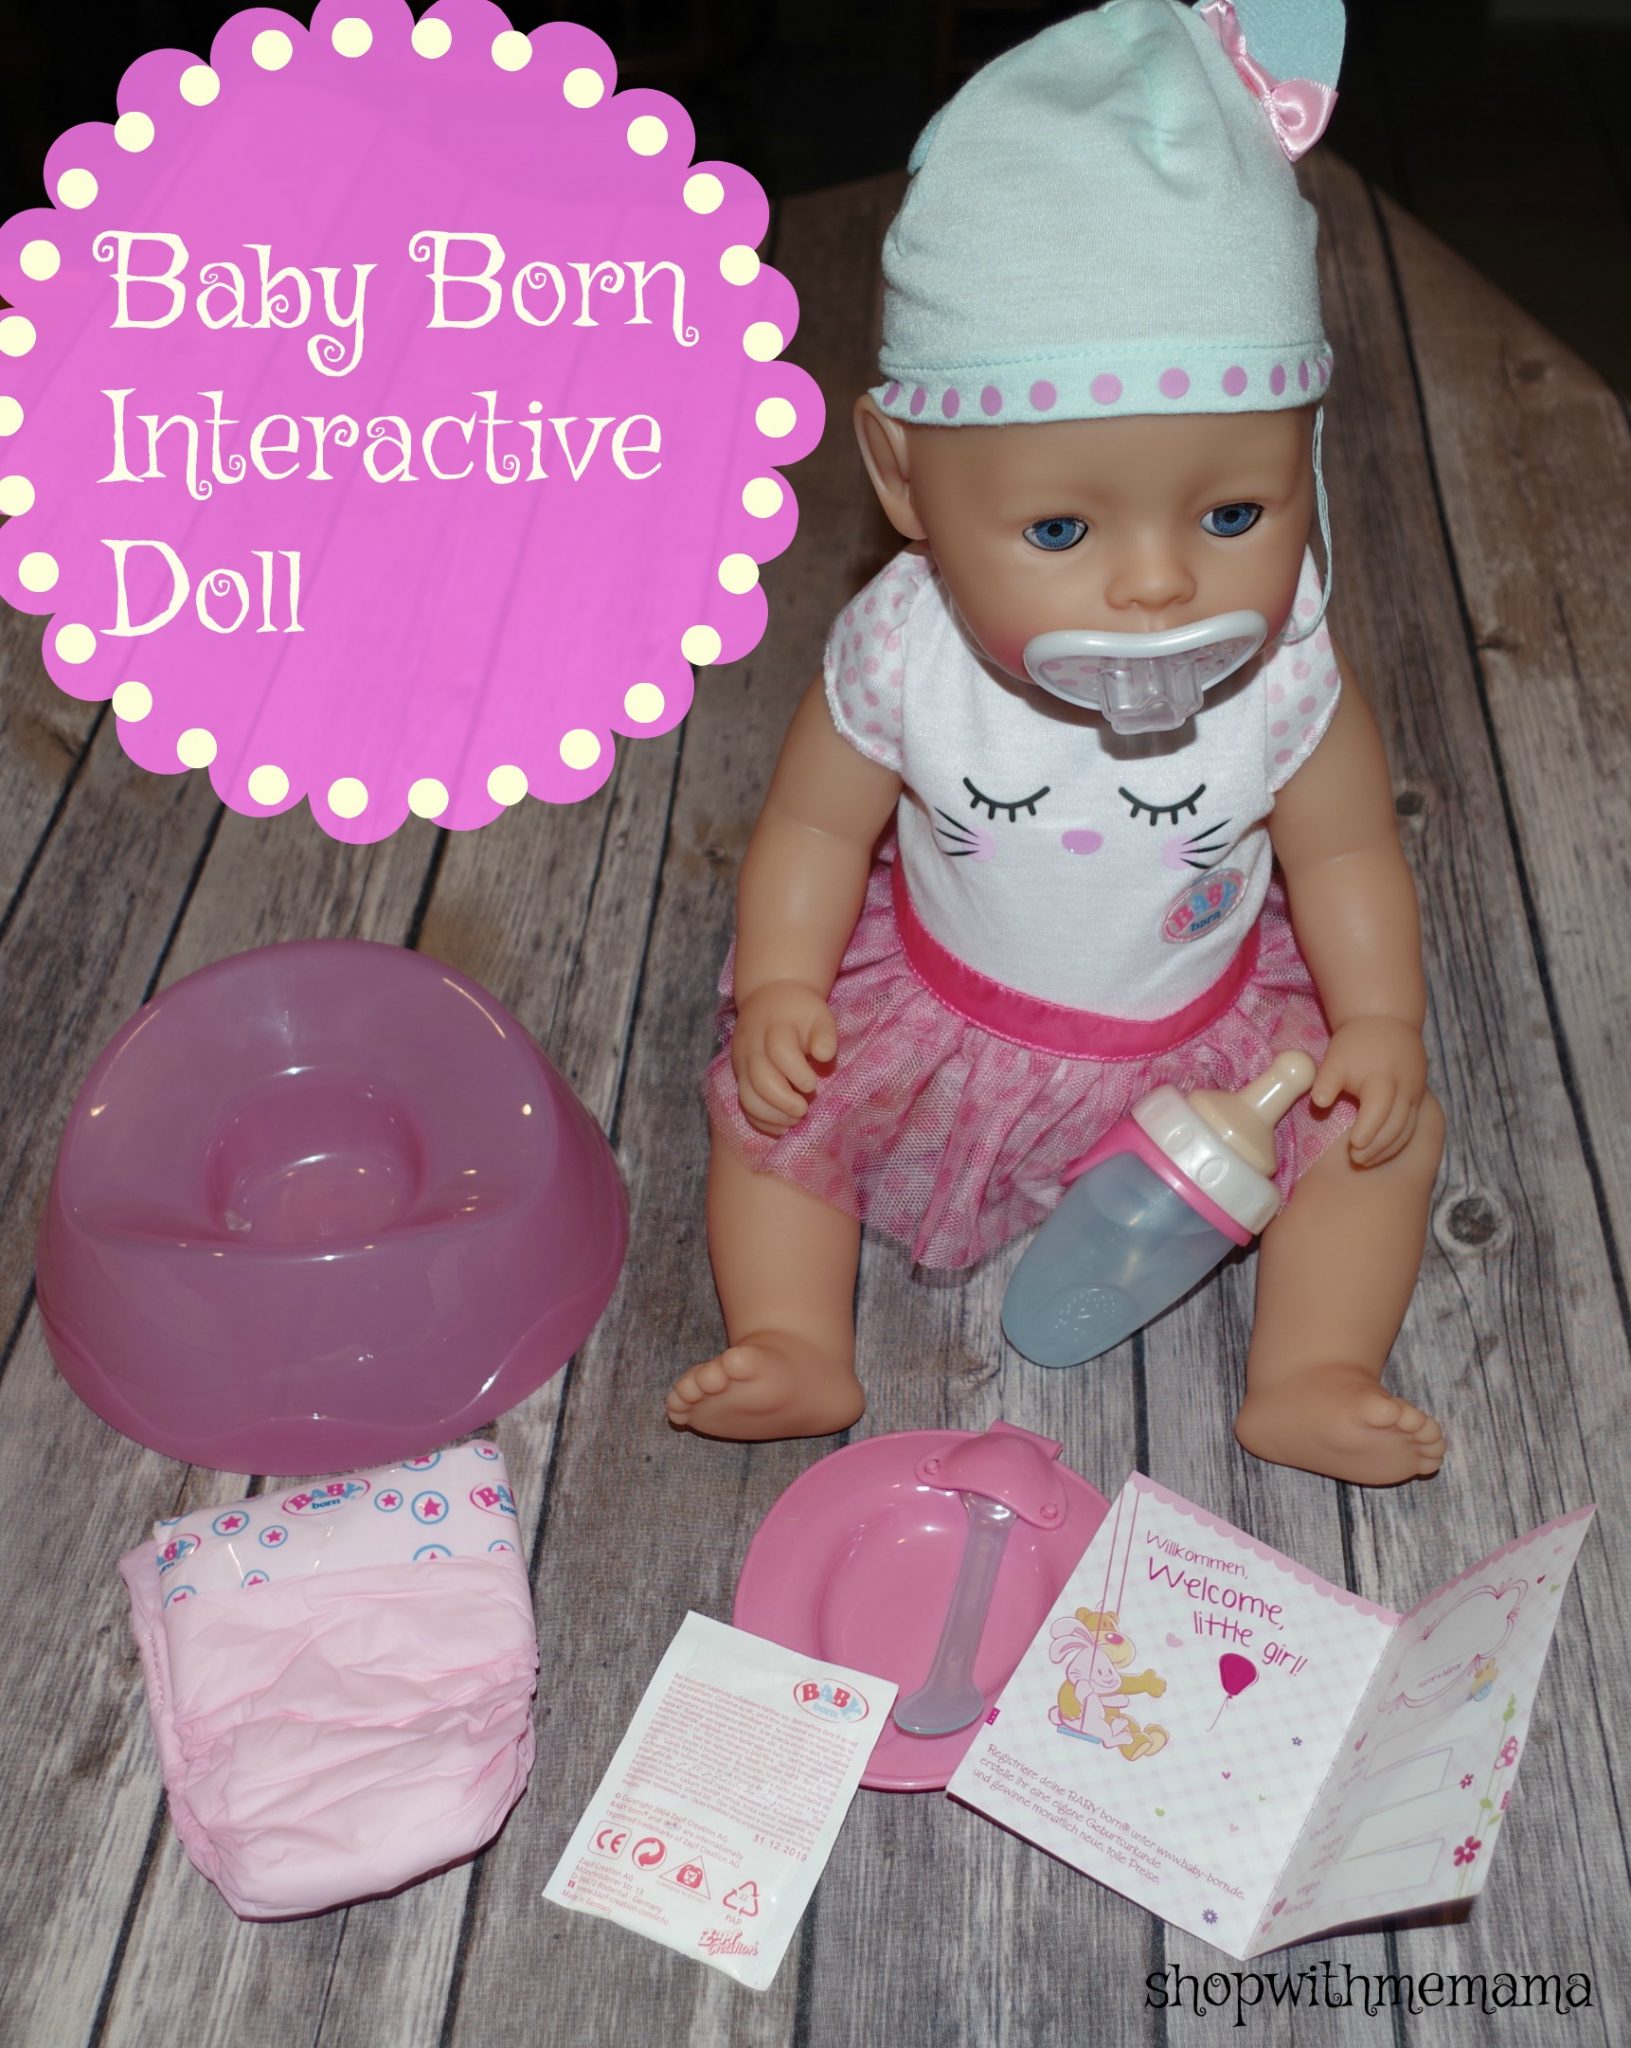 Baby Born Interactive Doll Review